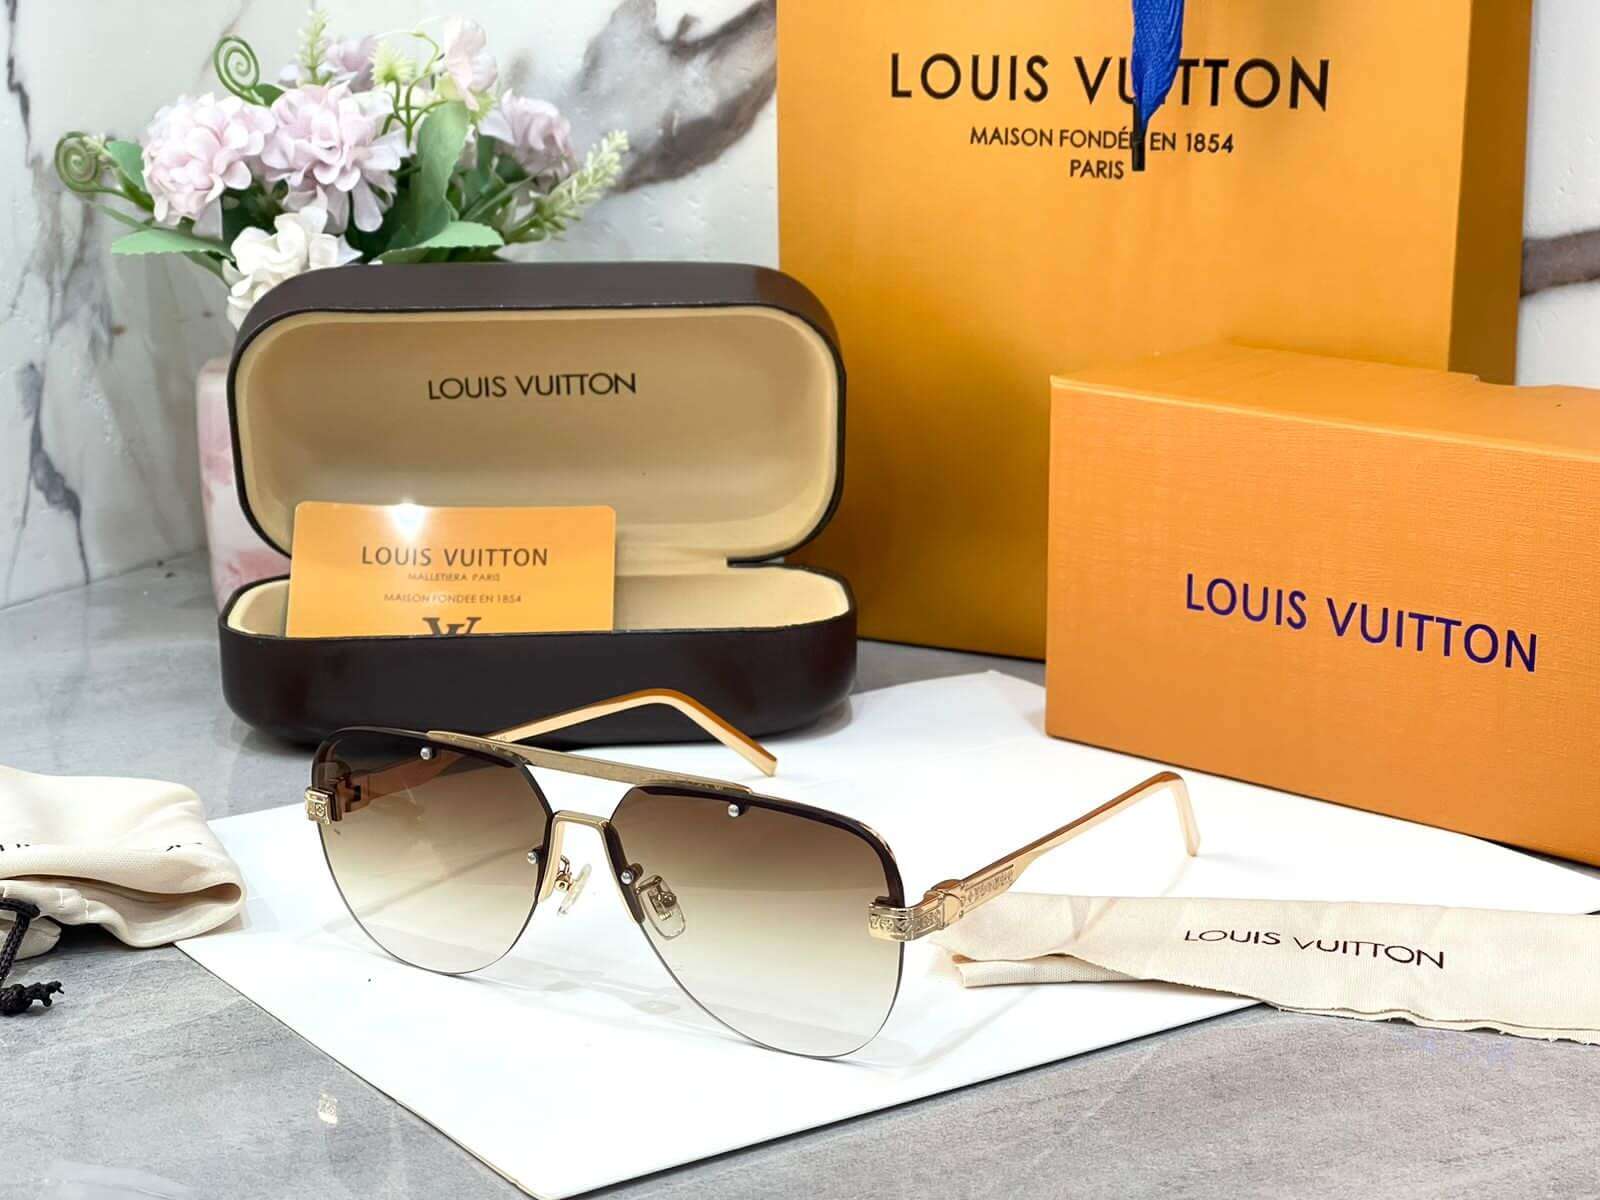 LV reflective sunglasses with box🖤 Cash on delivery available around